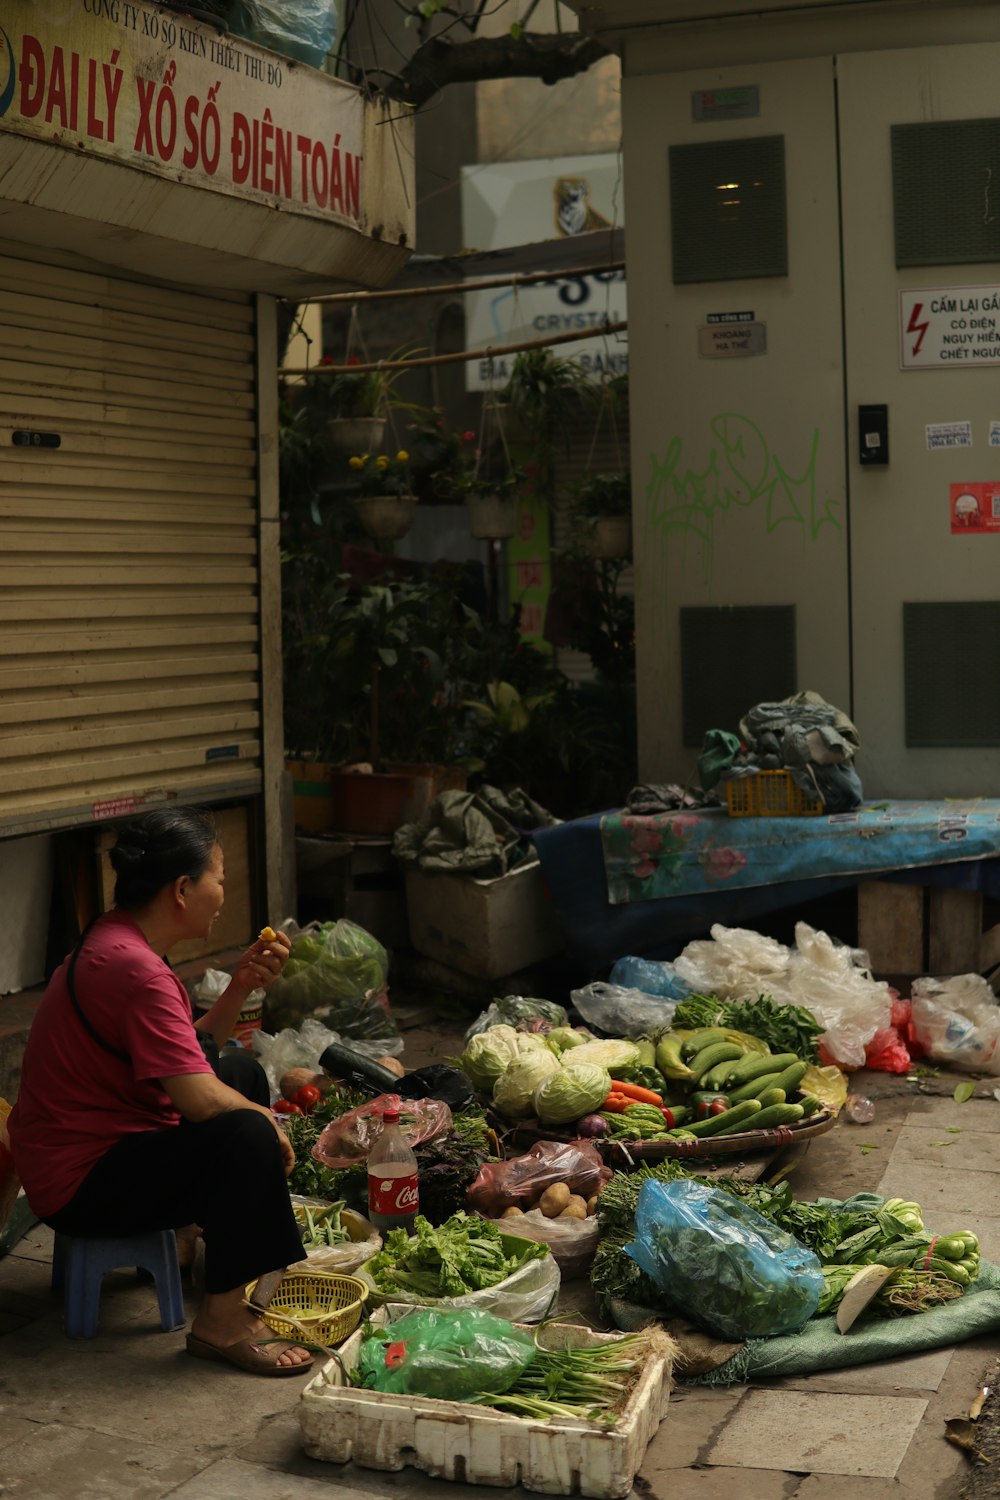 a woman sitting on a bench next to a pile of vegetables